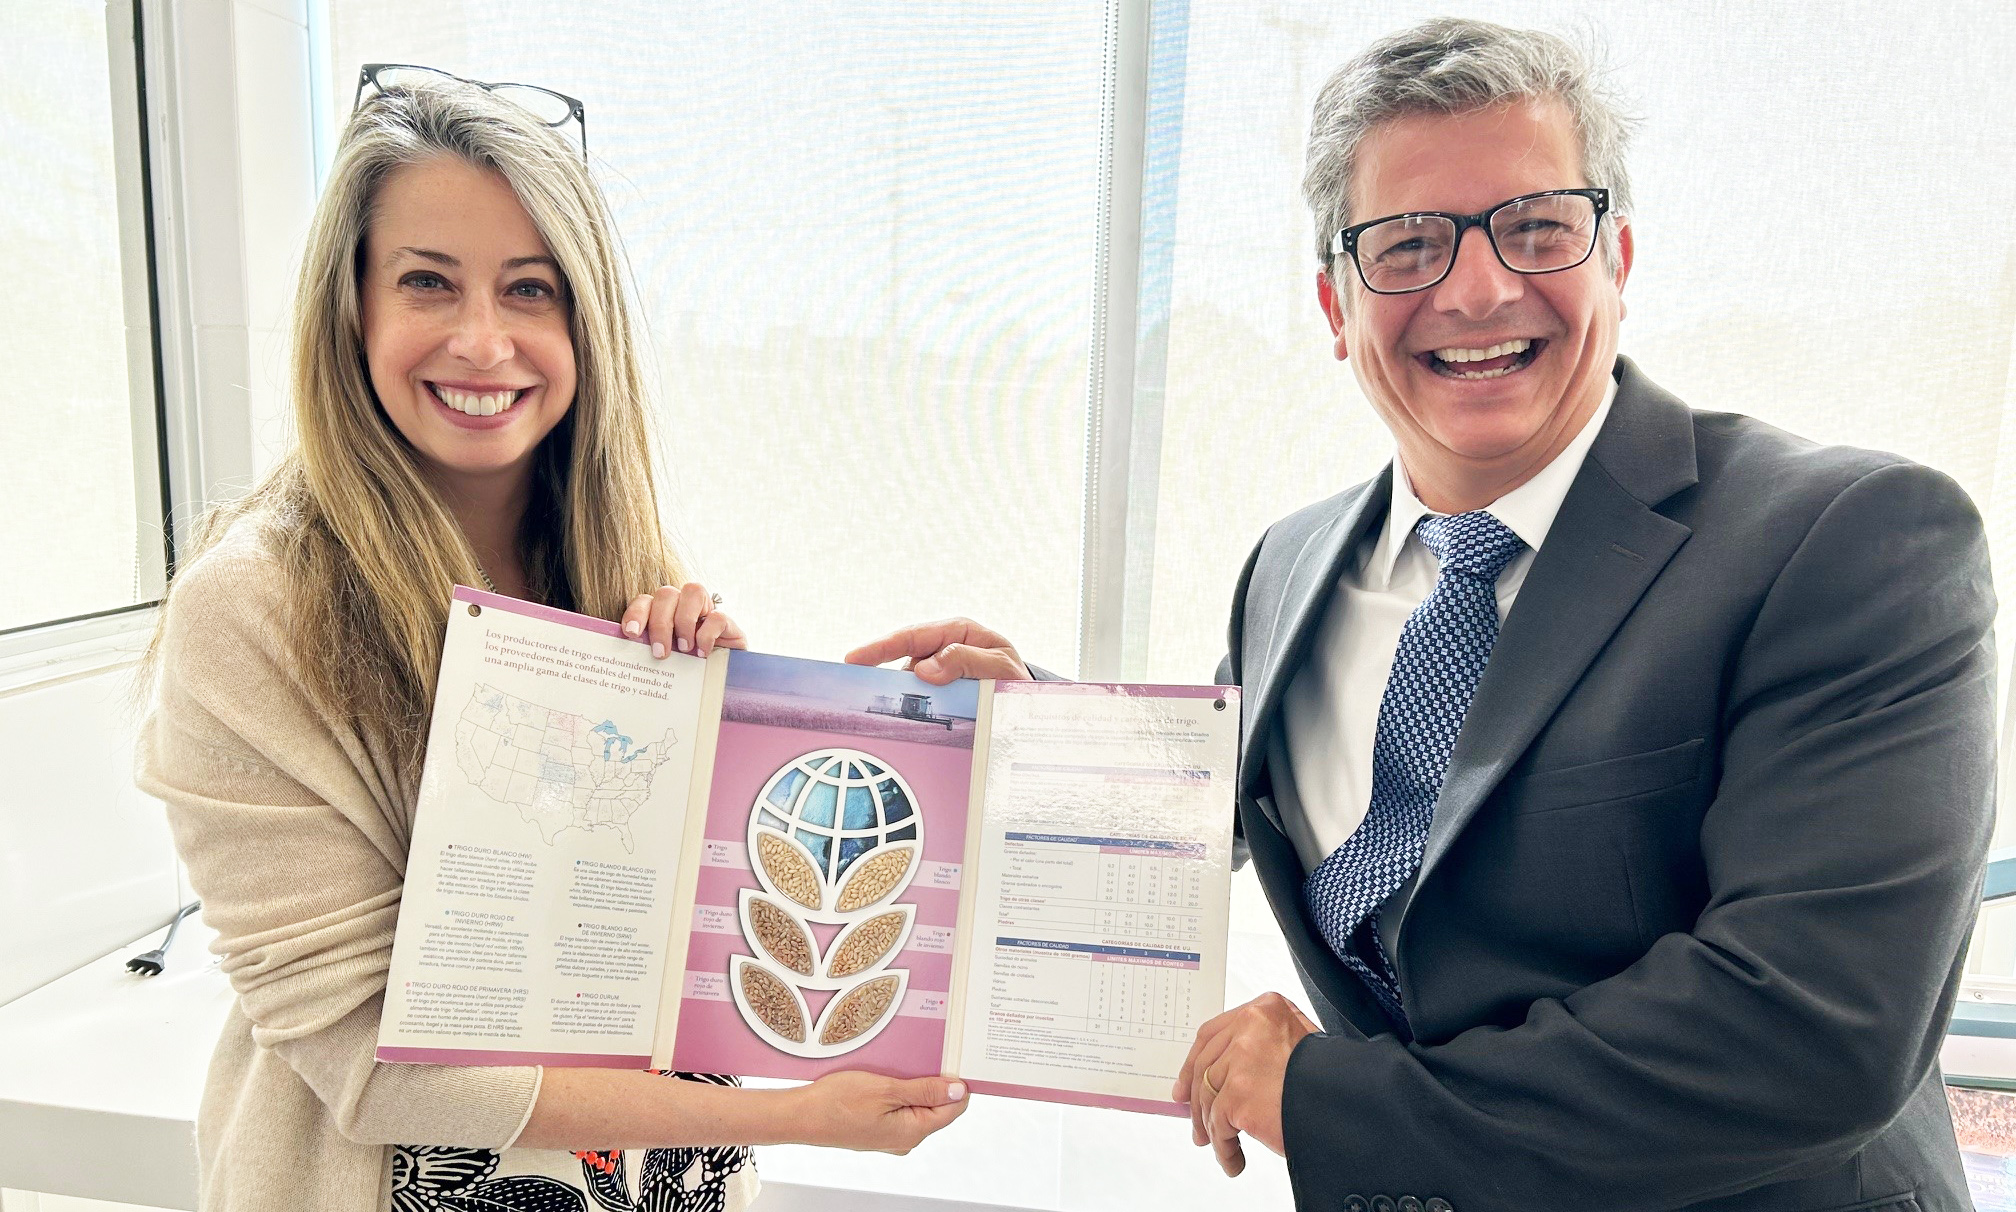 Galdos shares a U.S. wheat sample card with ambassador Meehan during discussions about the many uses for U.S. wheat and the preferences of end users in Chile.